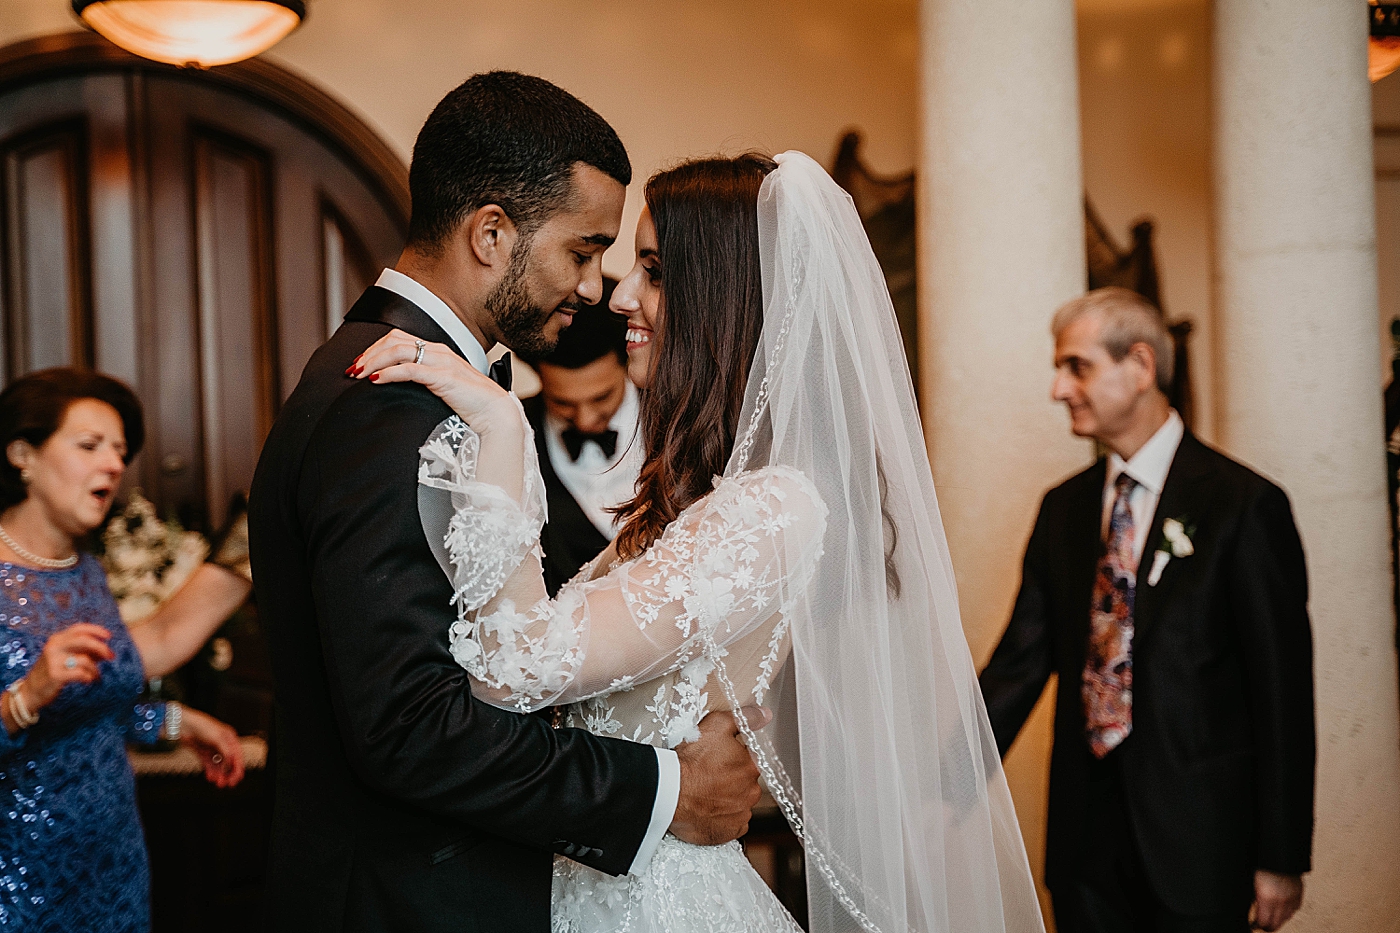 Bride and Groom holding each other during first dance Intimate Home Wedding captured by South Florida Wedding Photographer Krystal Capone Photography